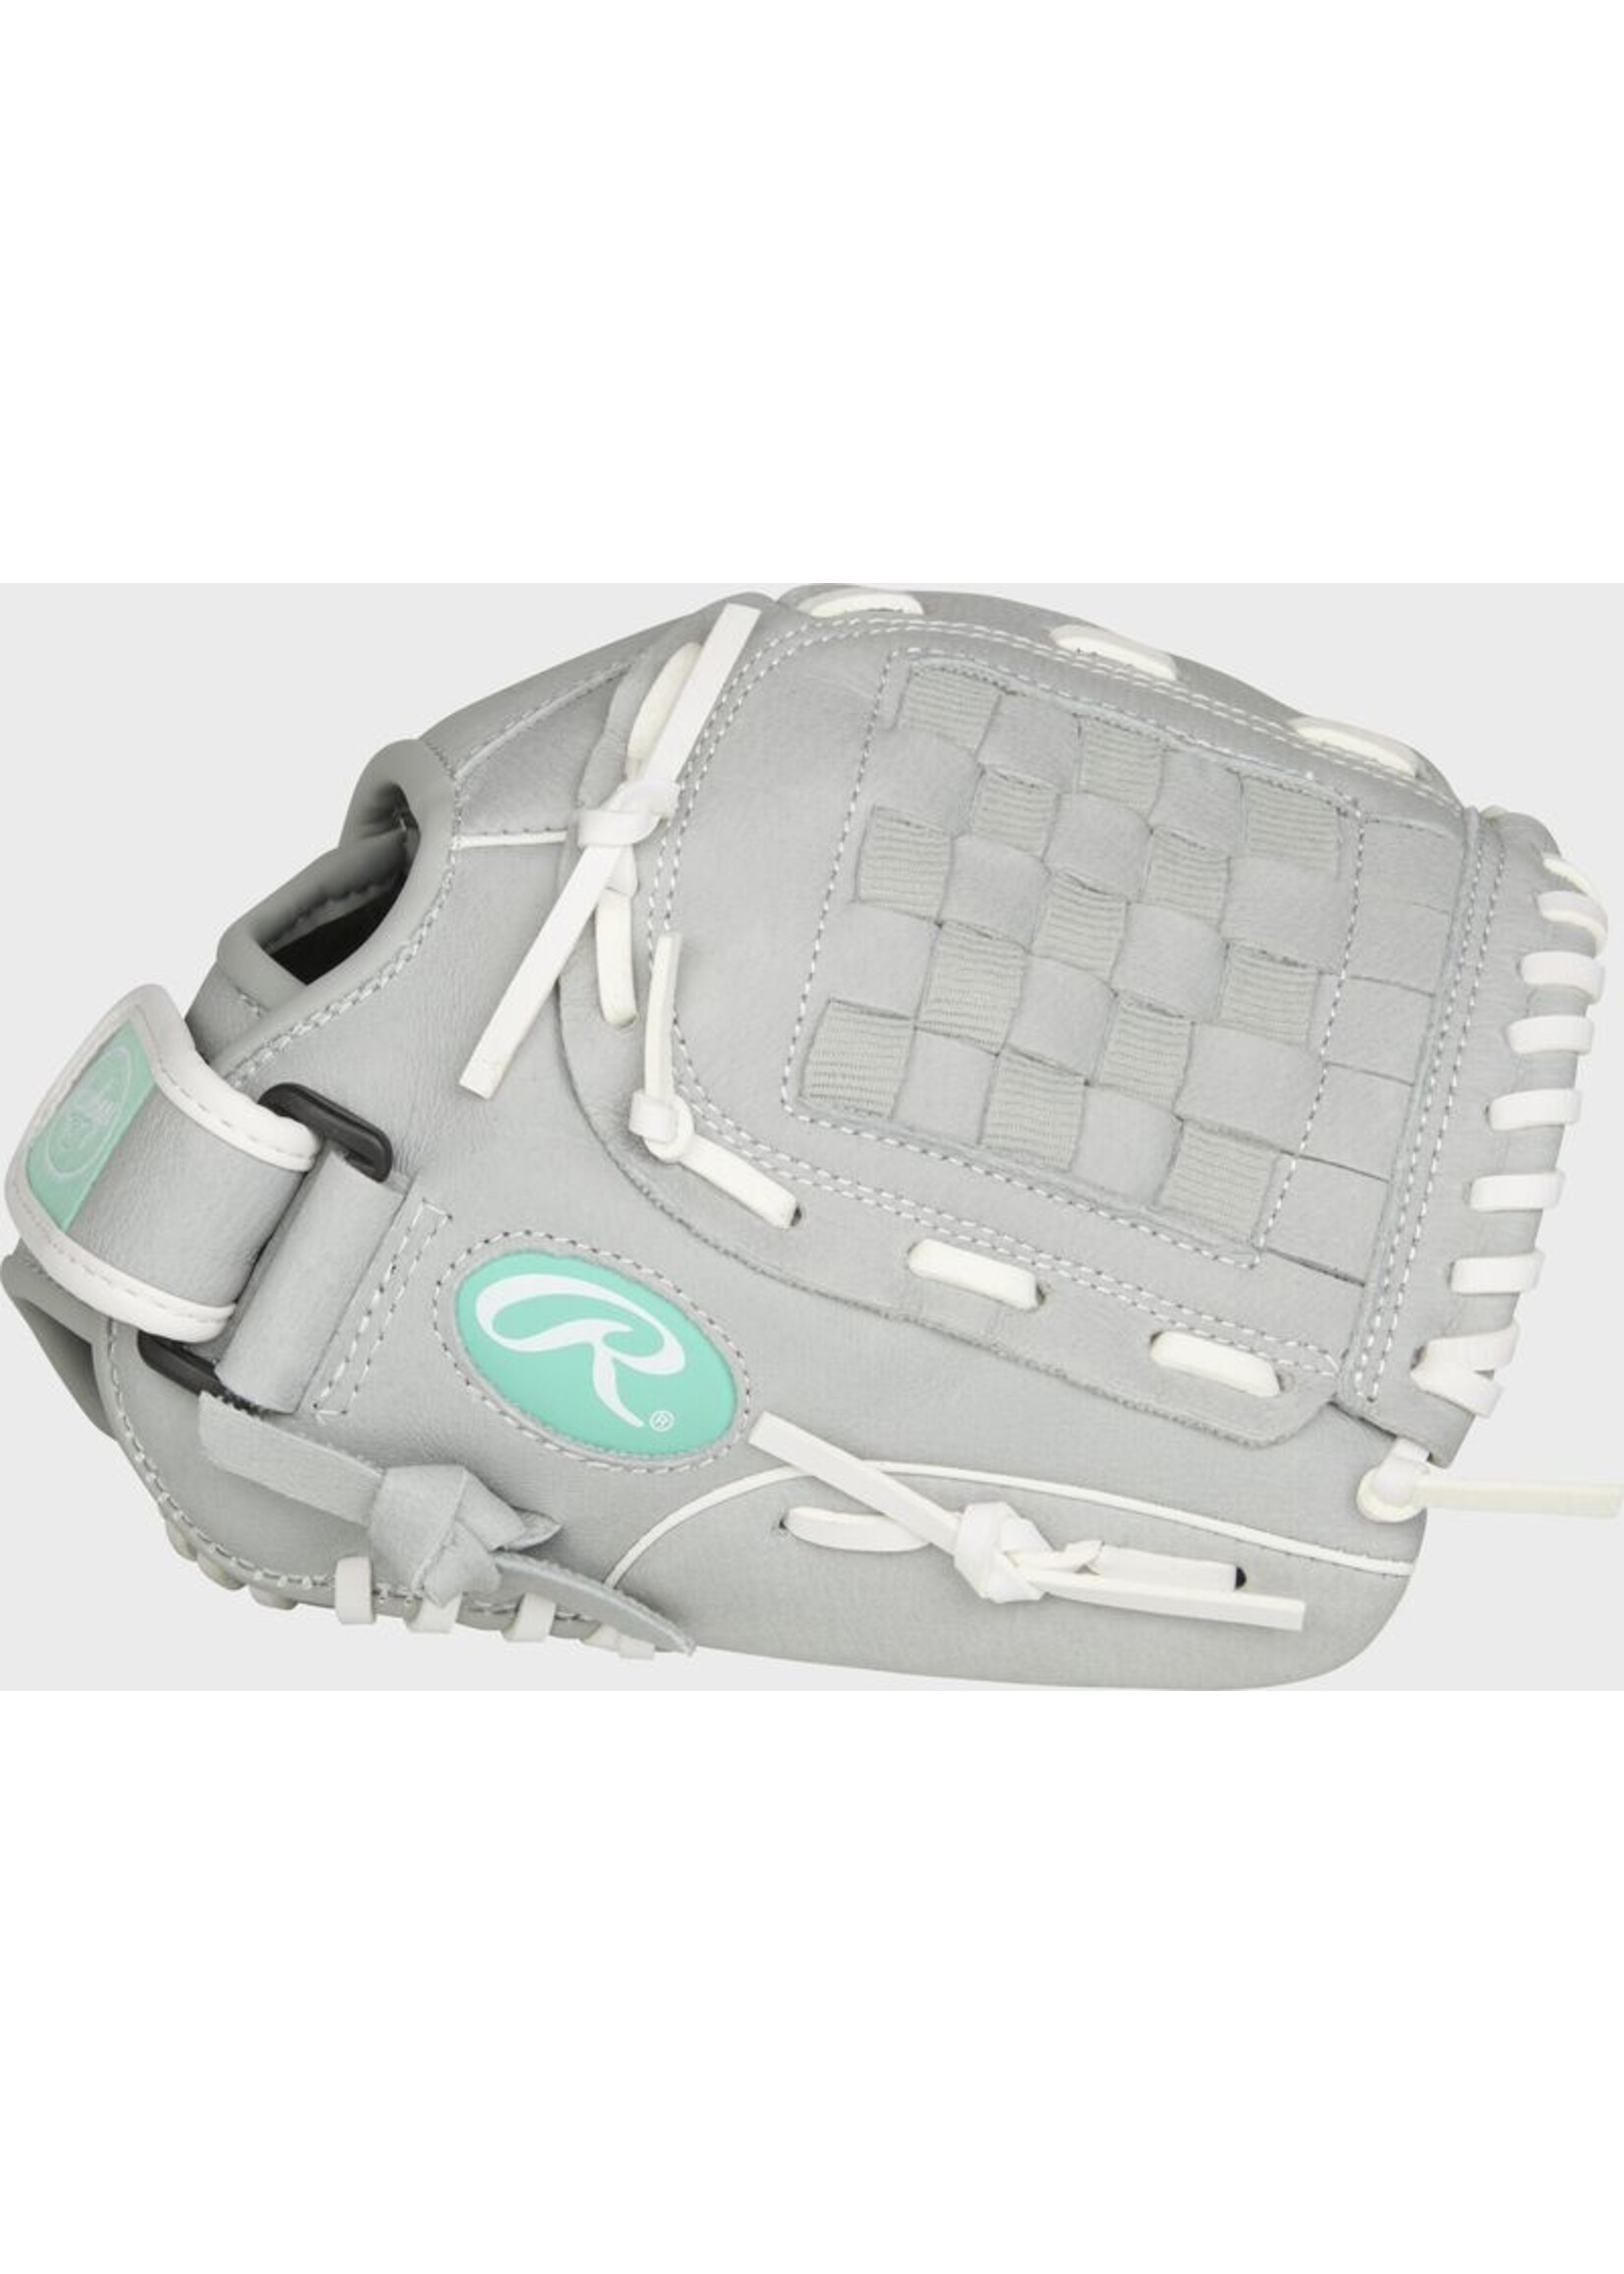 RAWLINGS RAWLINGS SURE CATCH SOFTBALL 11-INCH YOUTH INFIELD/PITCHER'S GLOVE SCSB115M